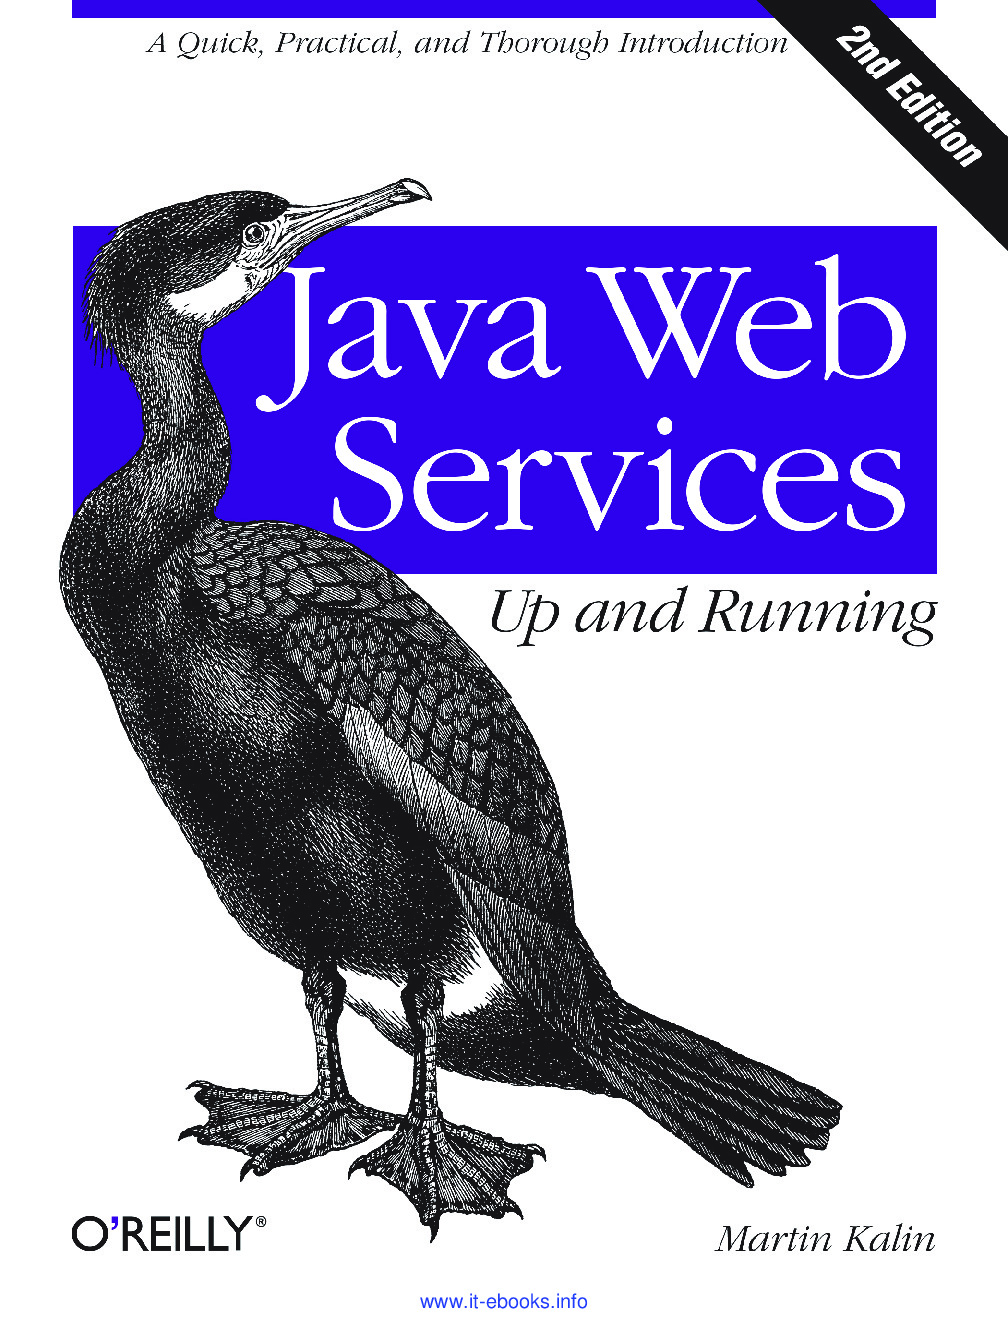 [JAVA][Java Web Services – Up and Running, 2nd Edition]